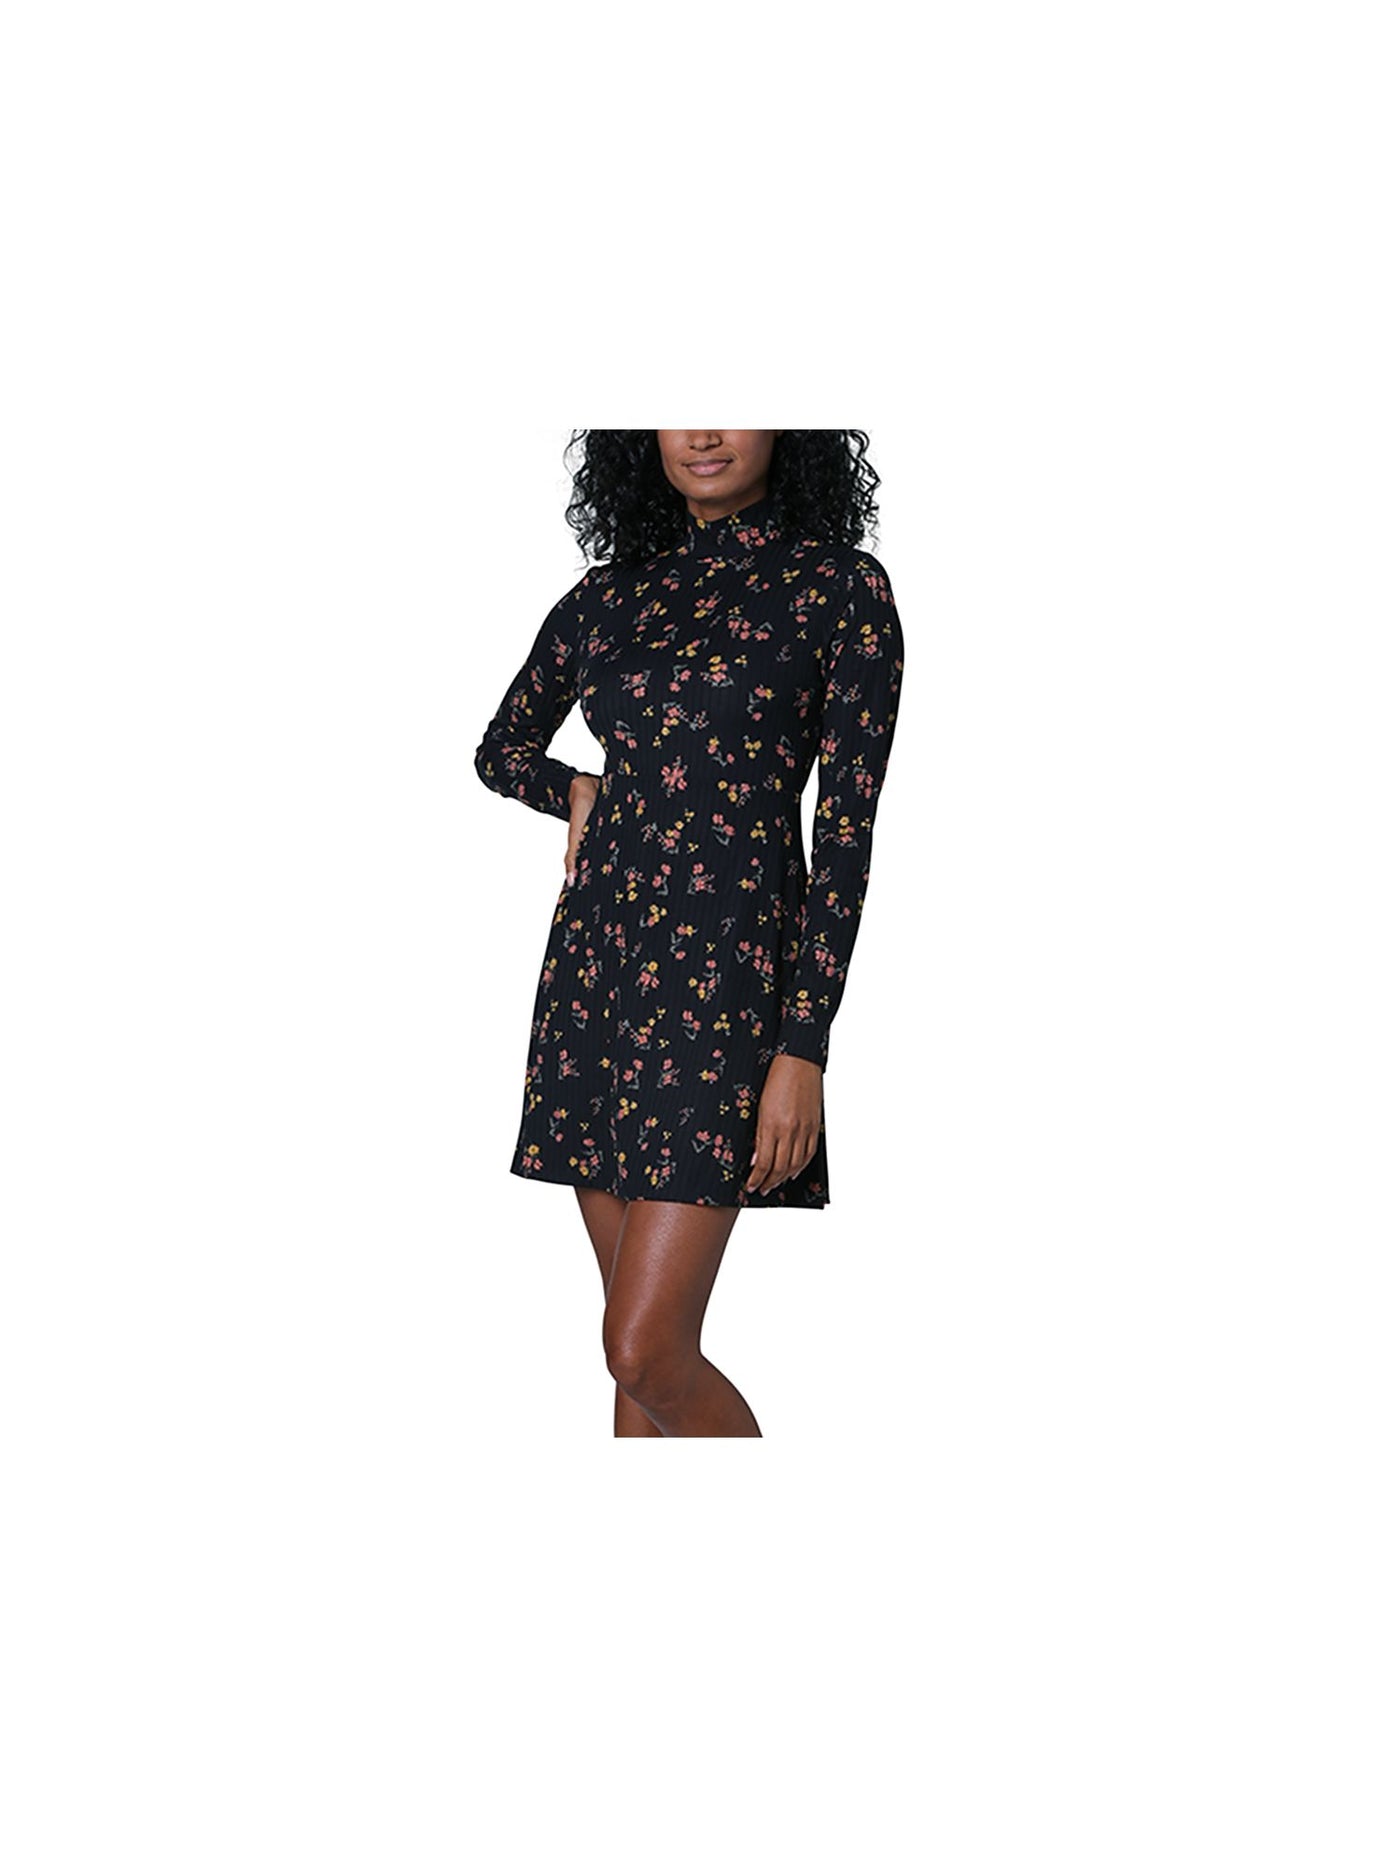 NO COMMENT Womens Black Mock-neck Ribbed Floral Long Sleeve Mini Fit + Flare Dress Juniors M